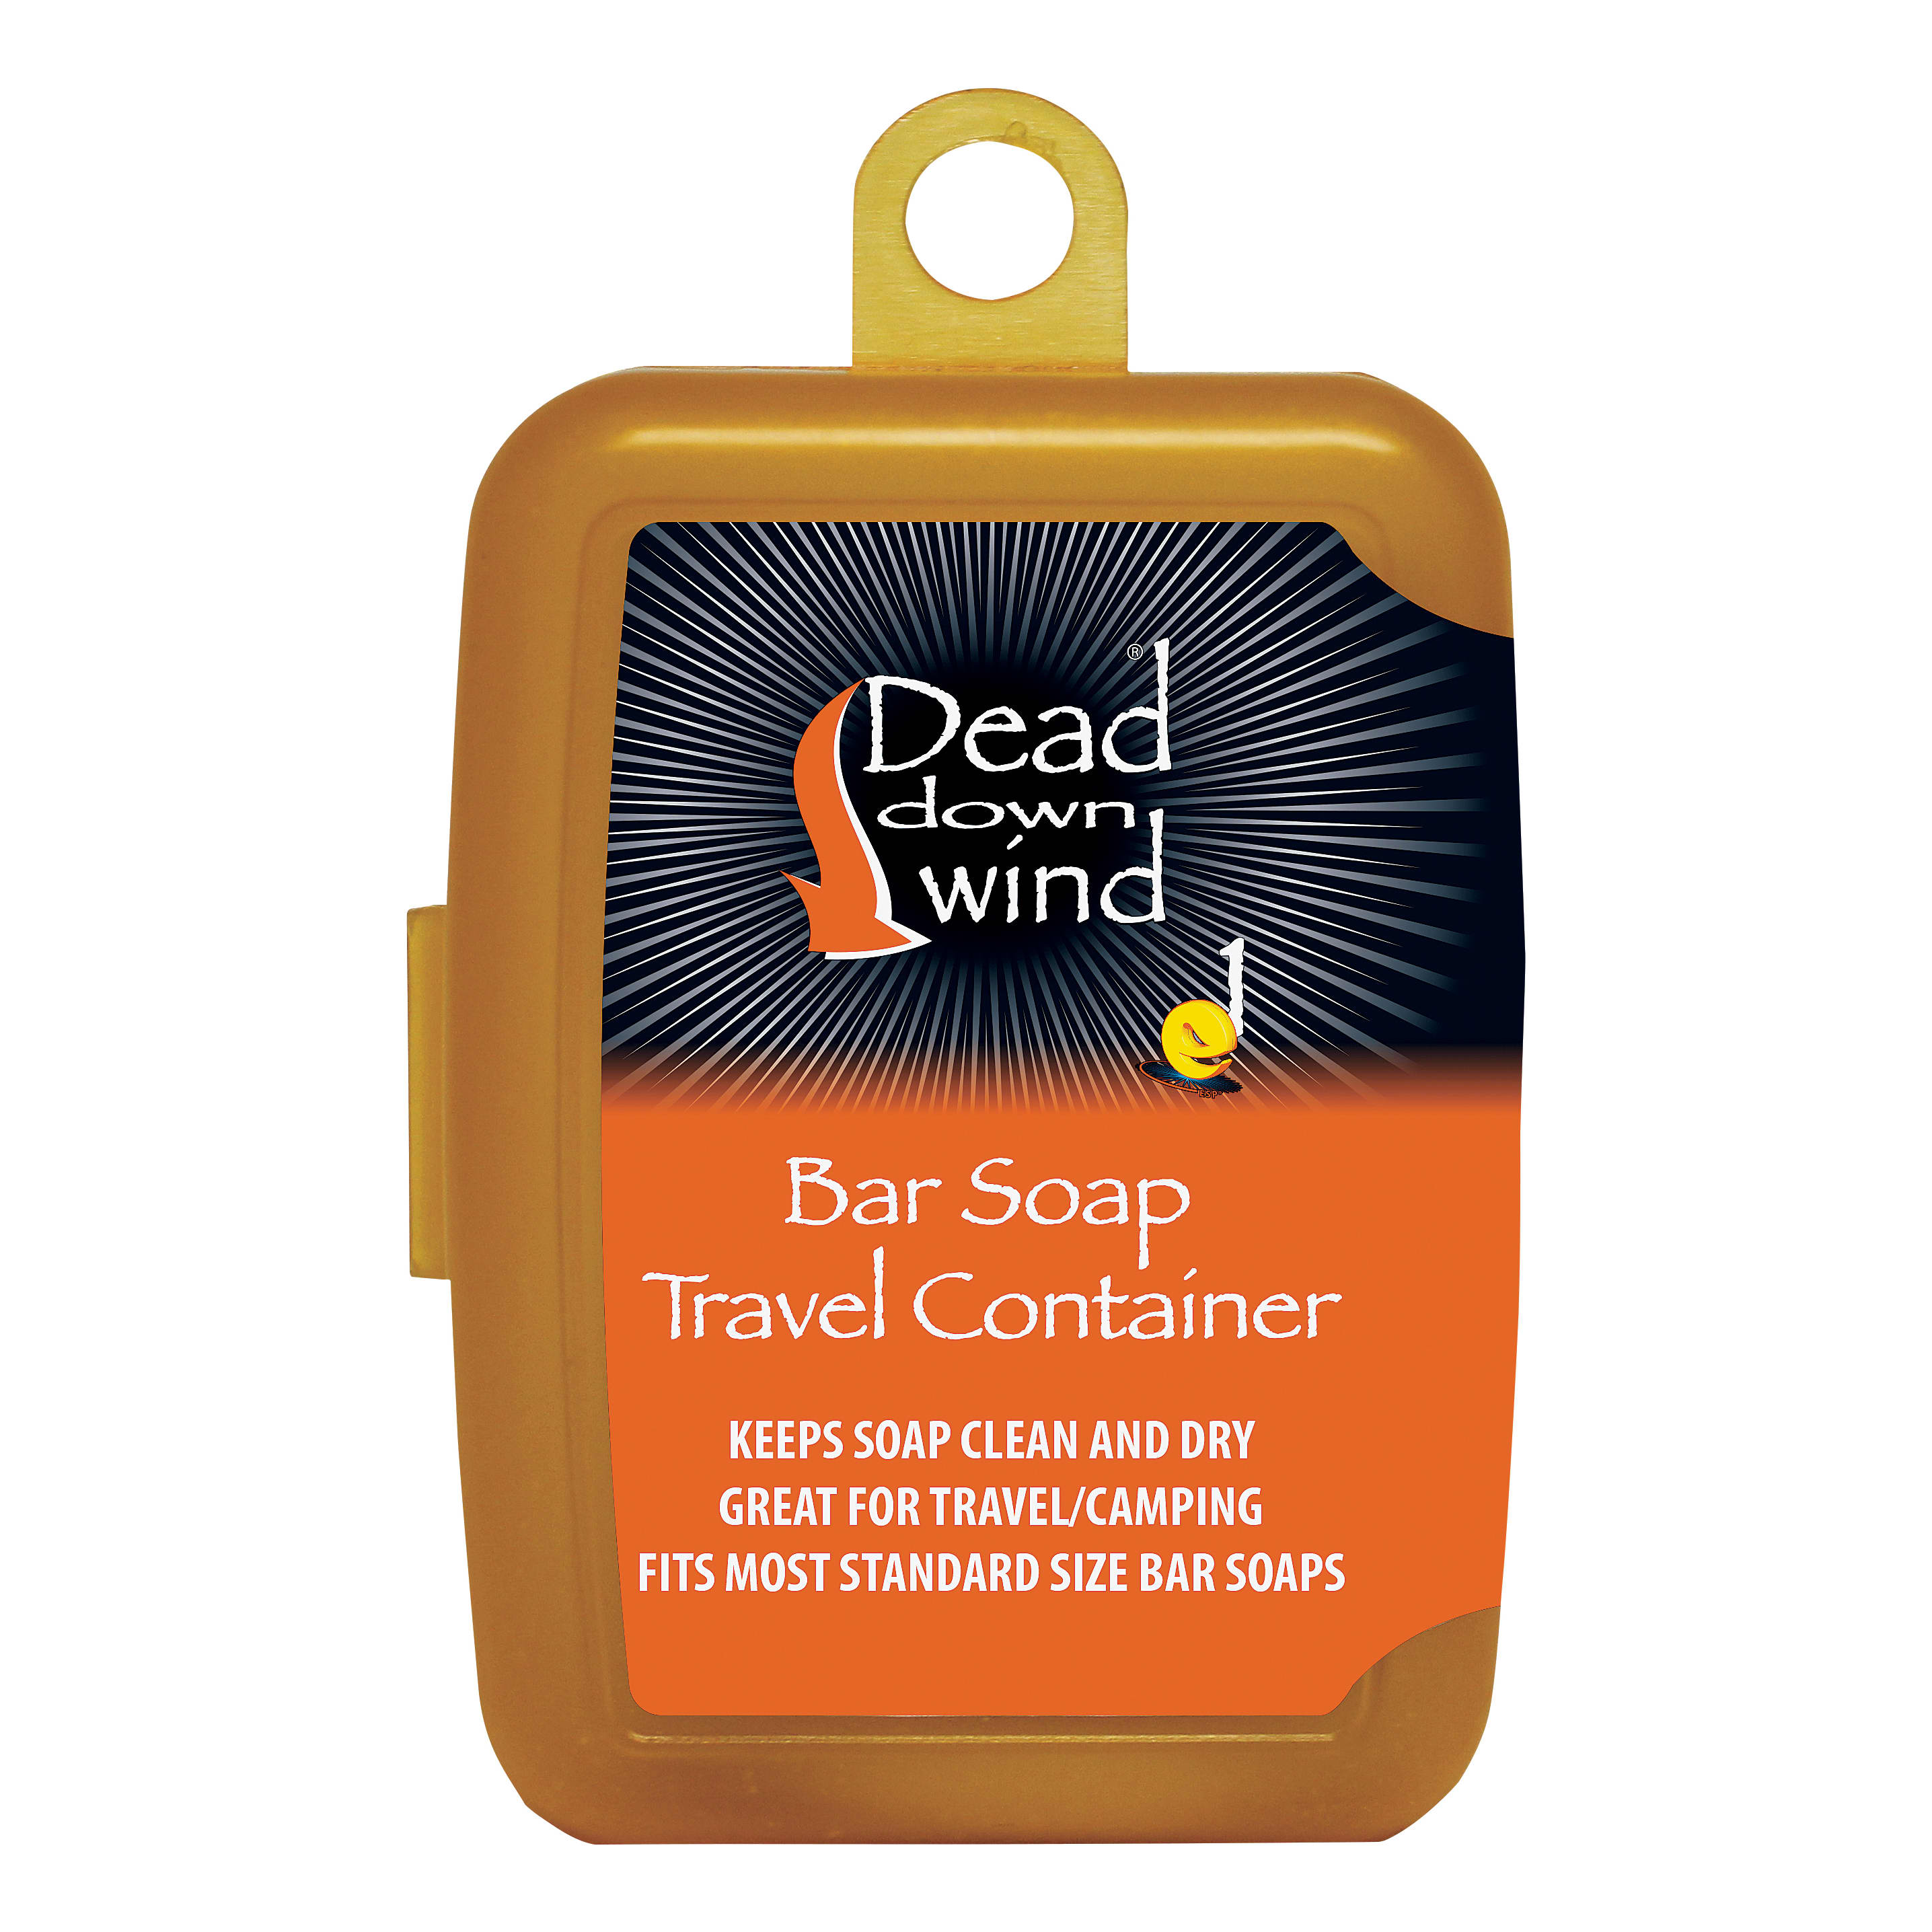 Dead Down Wind Bar Soap with Travel Container